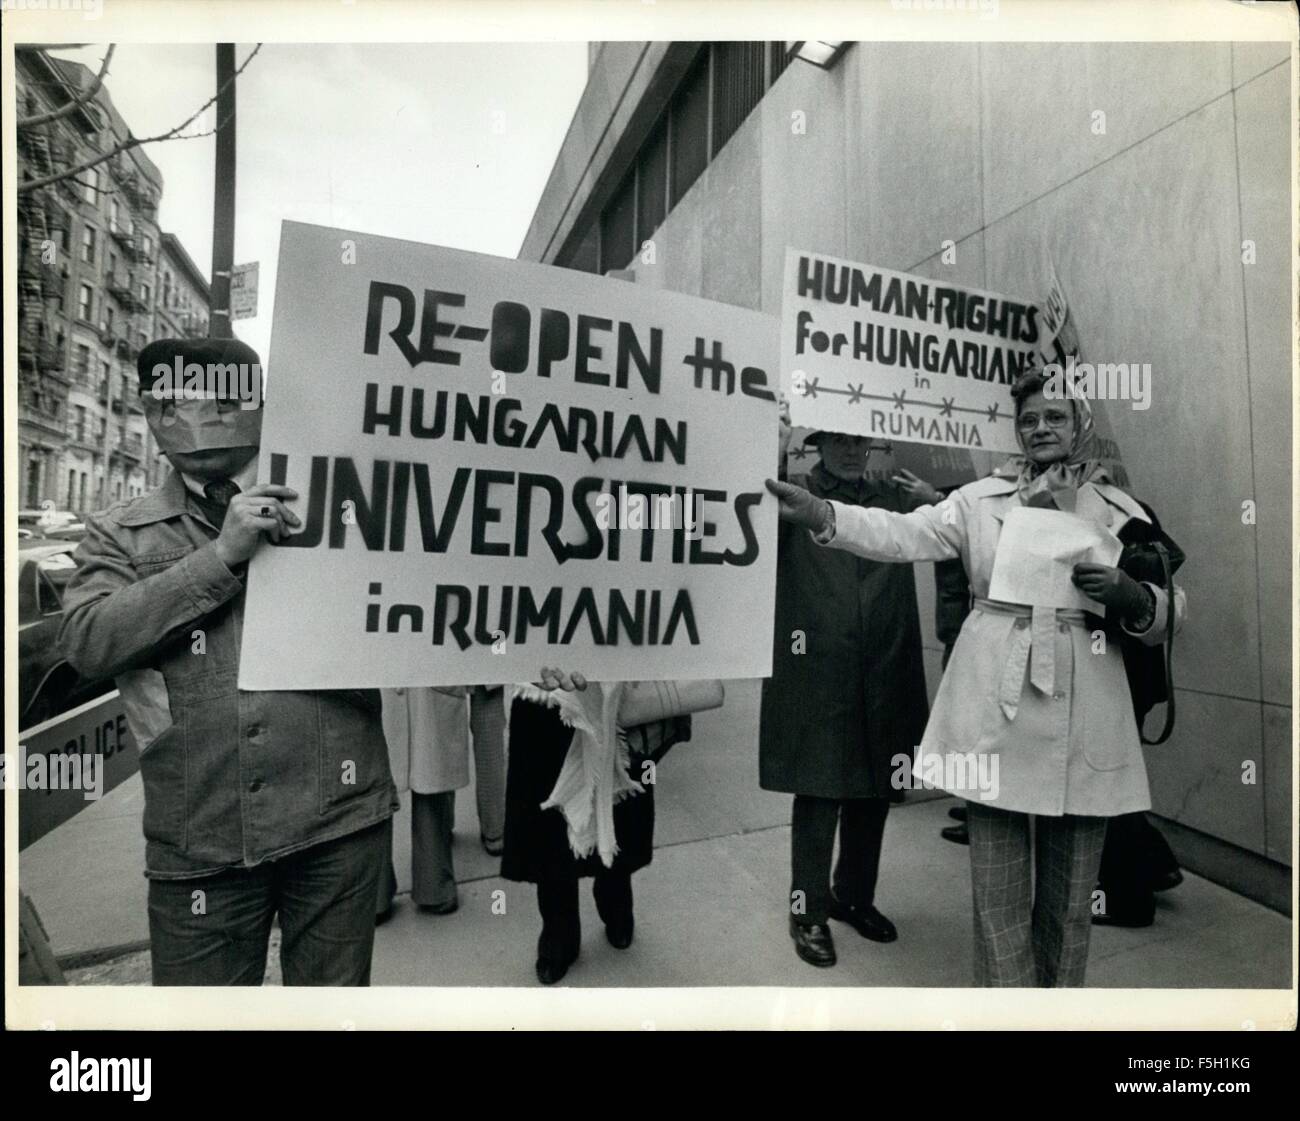 1977 - Human Rights demonstration at Columbia Univ. Several hundreds American of Hungarian origin demonstrated against the brutal oppression of 3, 5 million minority inhabitants of Rumania. The Committee for Human Rights in Rumania fights against systematic discrimination in all fields of cultural and economic life, also against straight historic lies by Communist functionaries disguised as a scholarly delegations. 3/31/77 Man in mask wants to protect relatives in Transylvania from retaliation. © Keystone Pictures USA/ZUMAPRESS.com/Alamy Live News Stock Photo